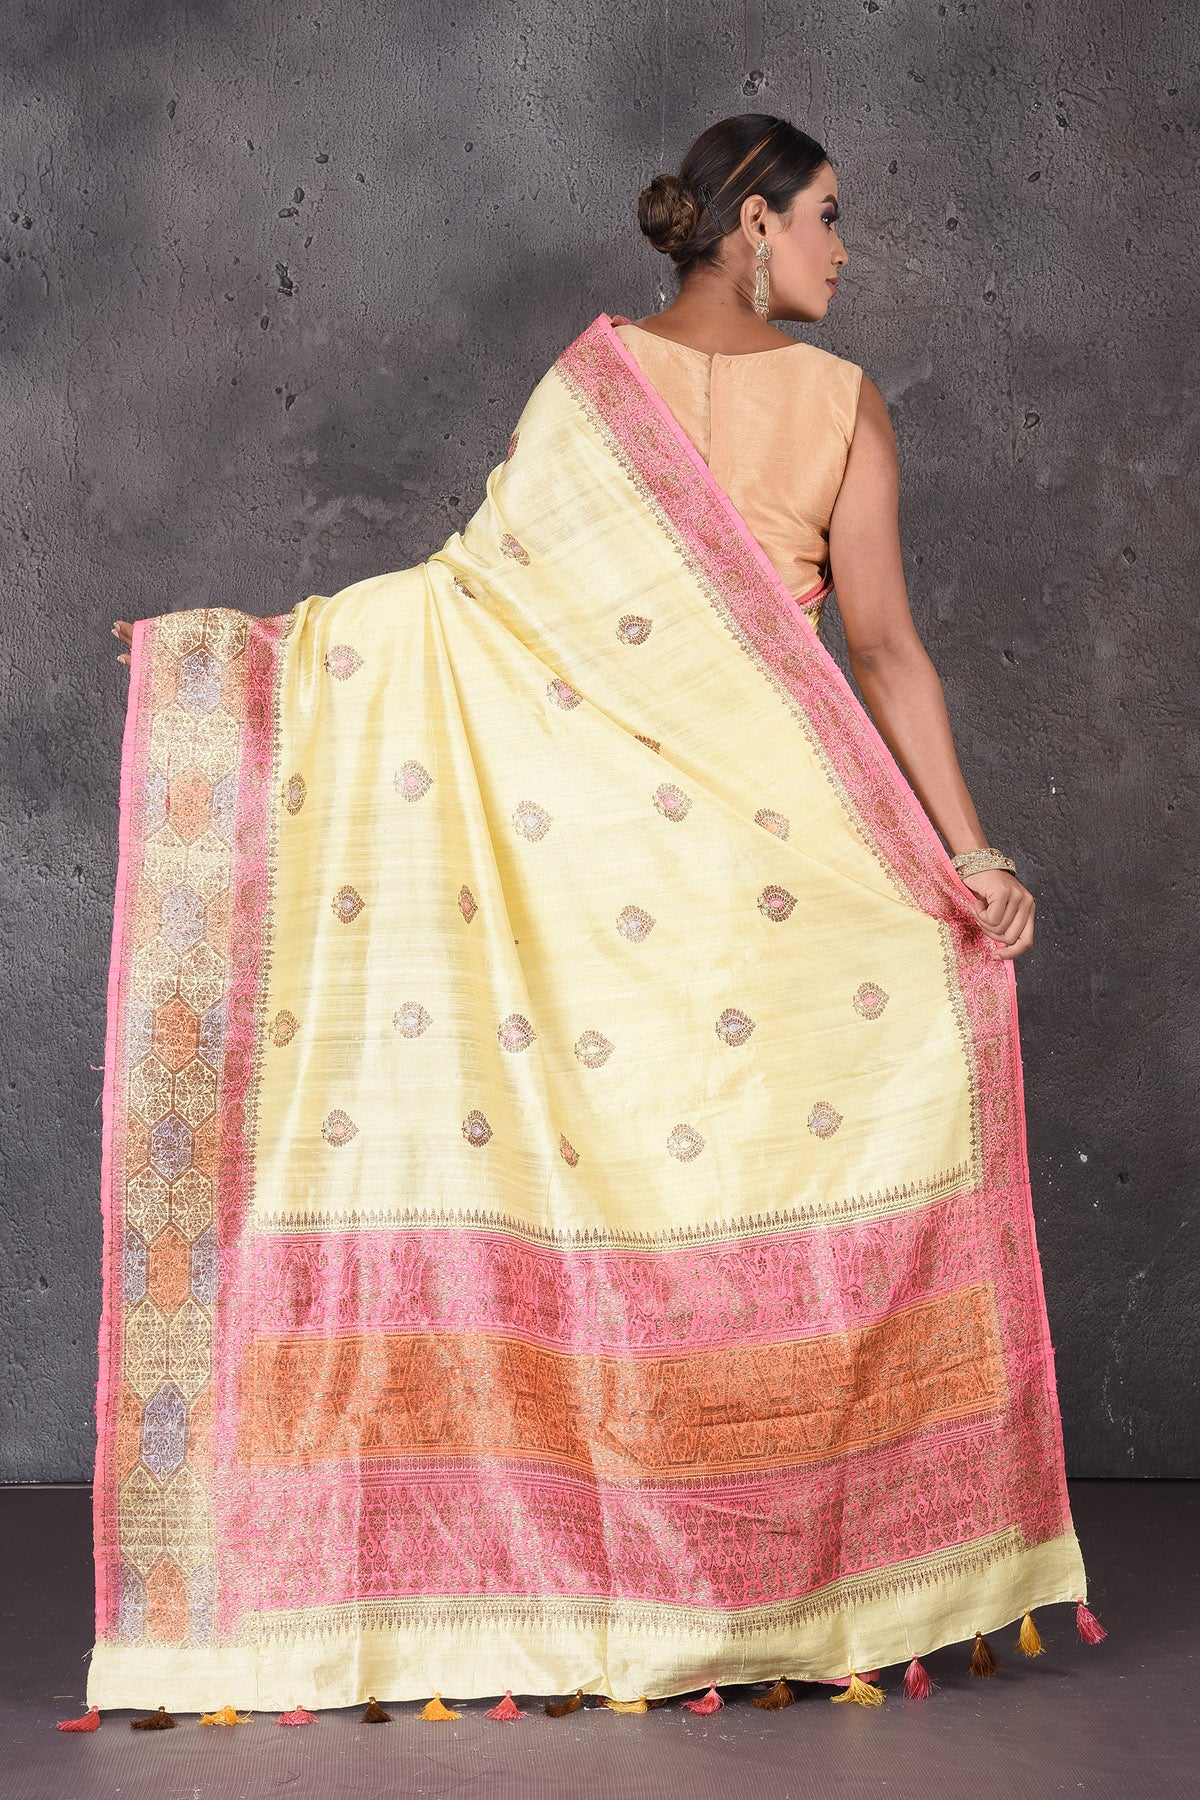 Buy stunning light yellow dupion silk saree online in USA with antique zari border. Flaunt your ethnic style on special occasions with latest designer sarees, pure silk sarees, handwoven sarees, Kanchipuram silk sarees, embroidered sarees, georgette sarees, party sarees from Pure Elegance Indian saree store in USA.-back